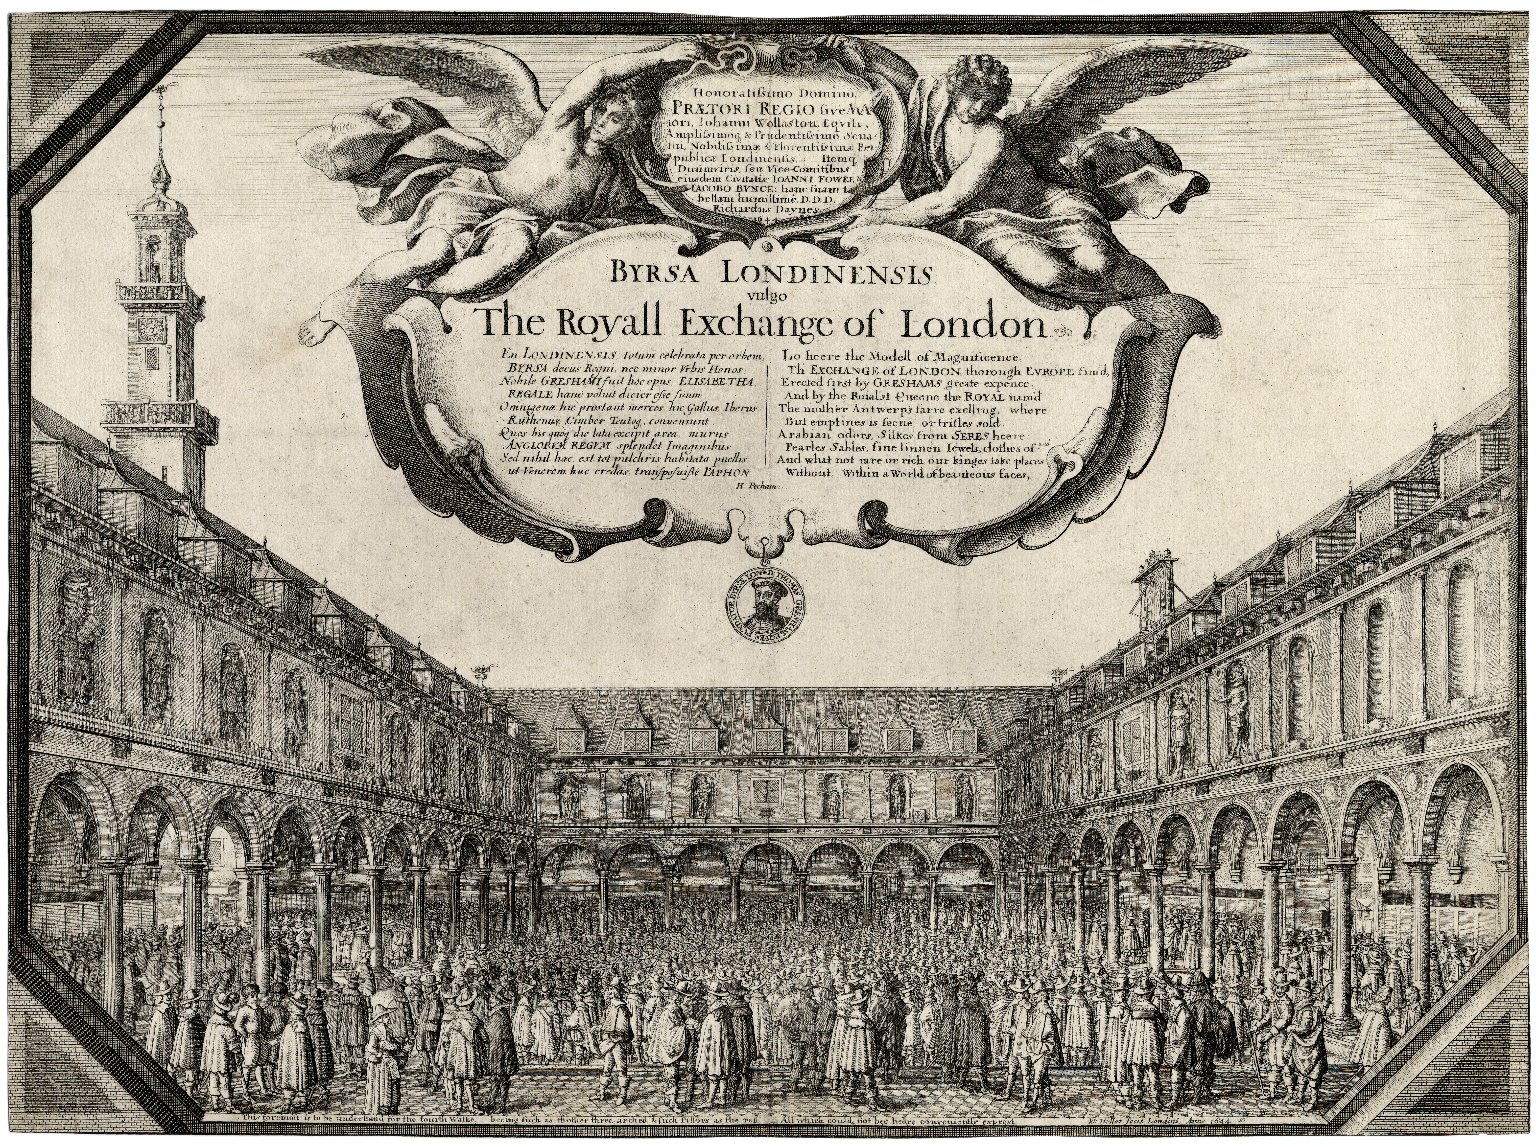 Engraving of the courtyard of the Royal Exchange by Wenceslaus Hollar. Image courtesy of the Folger Digital Image Collection.